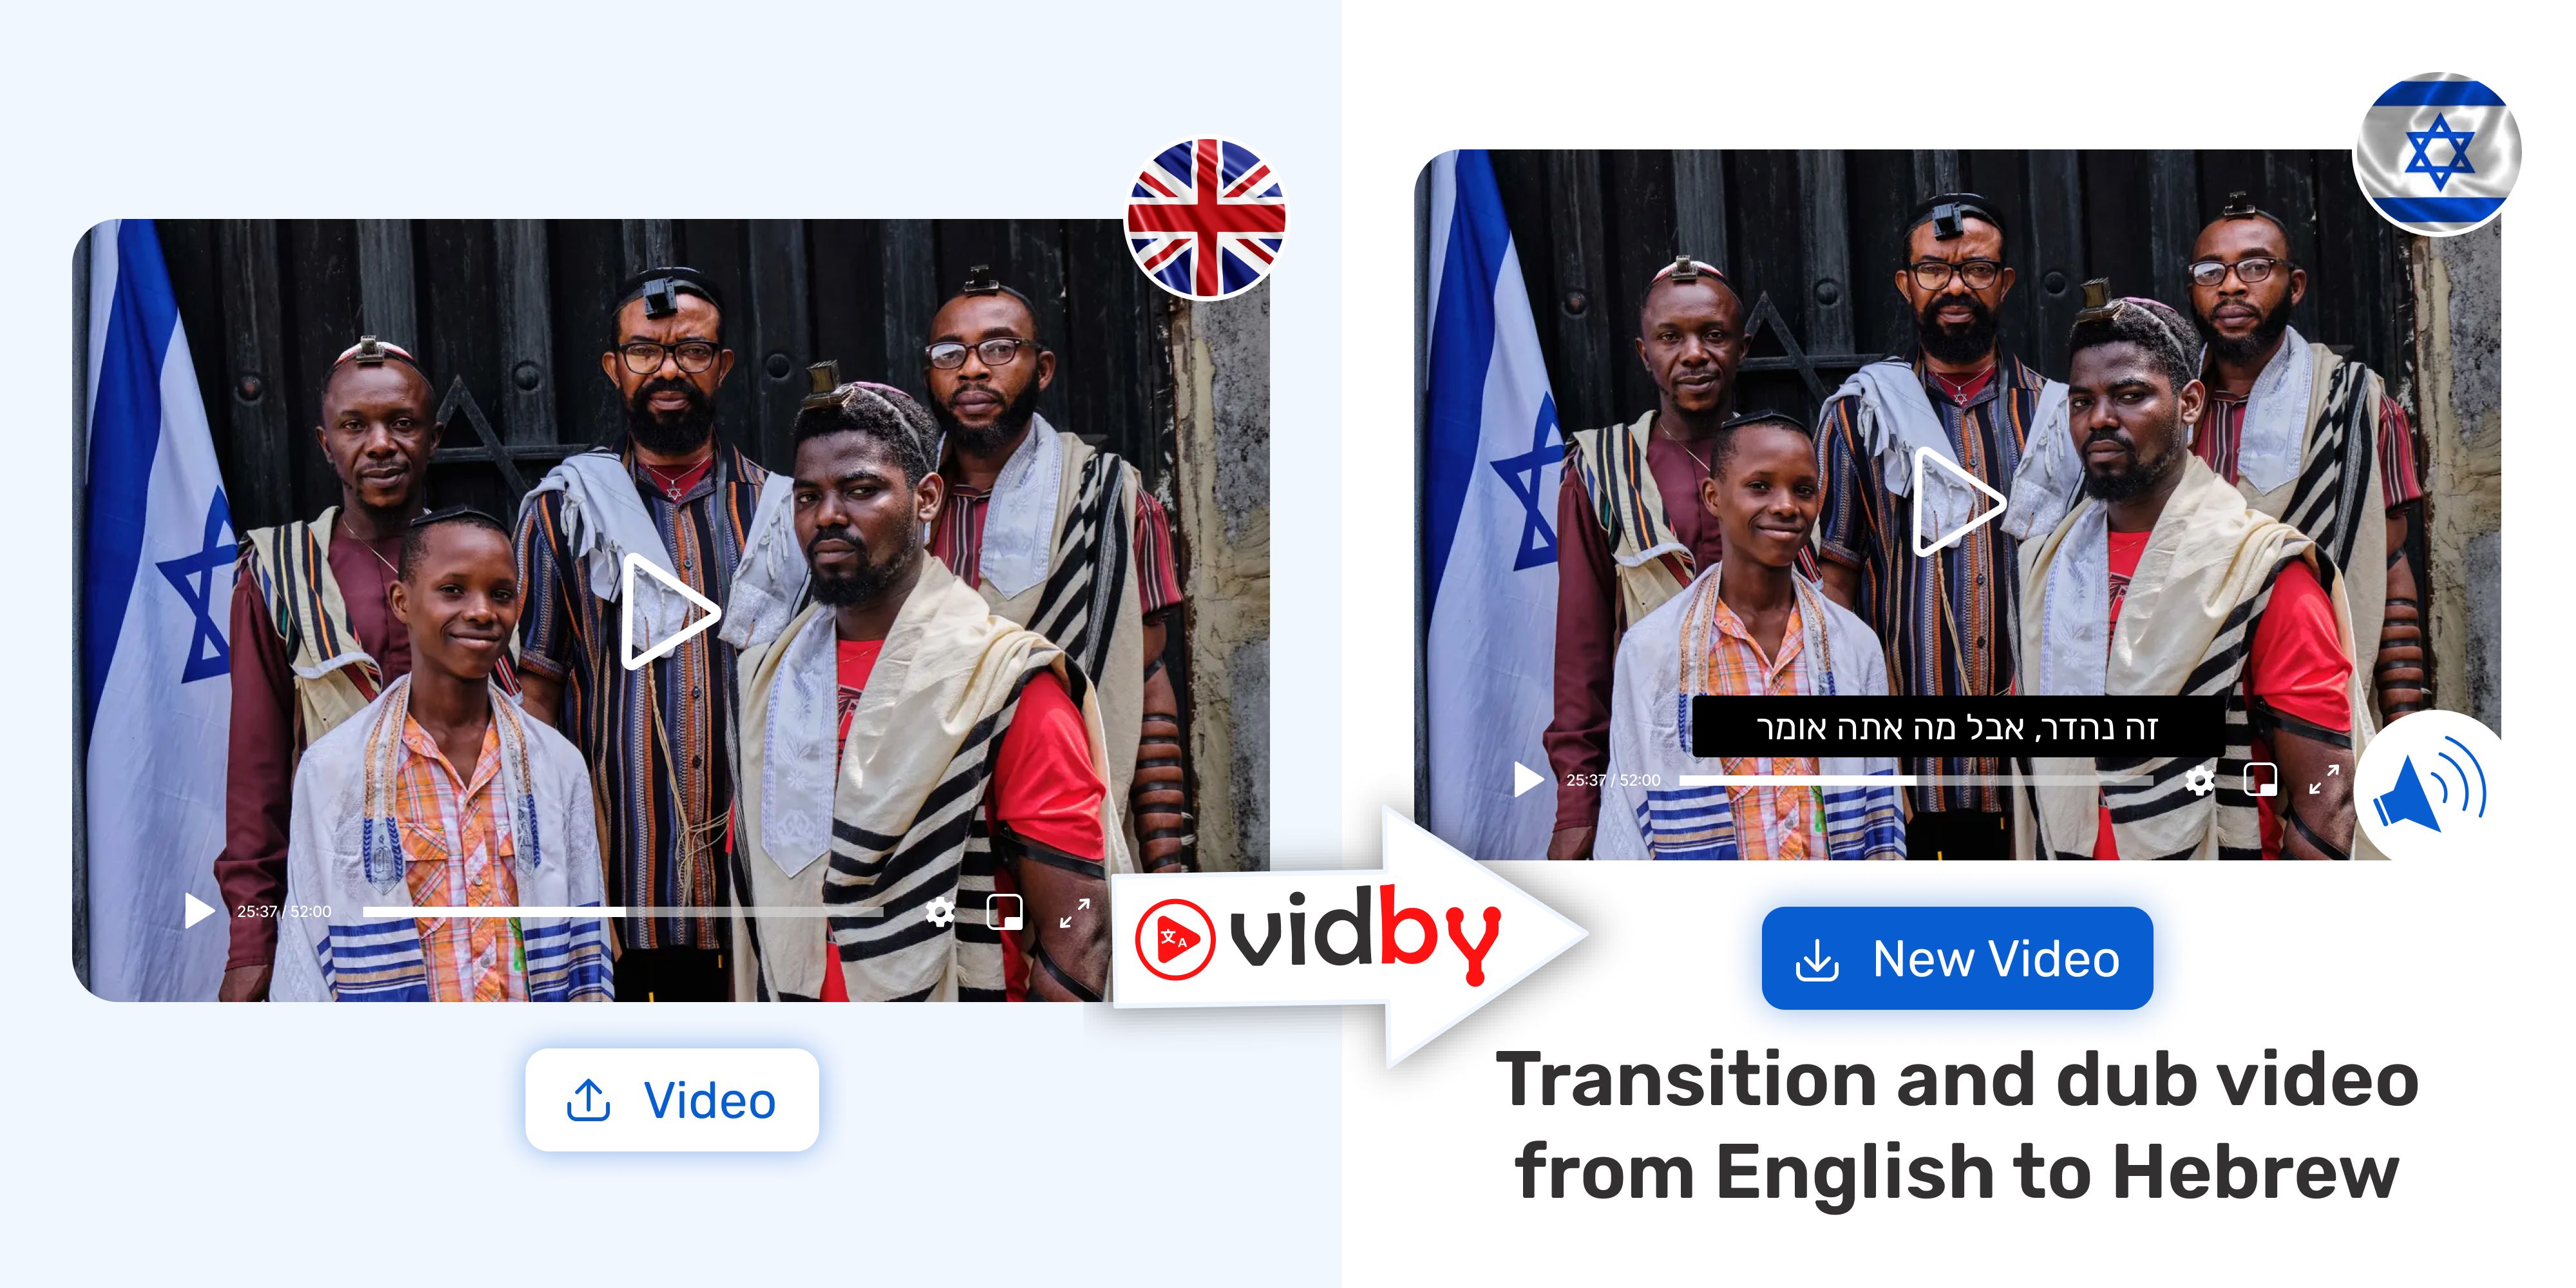 Translate English video to Hebrew